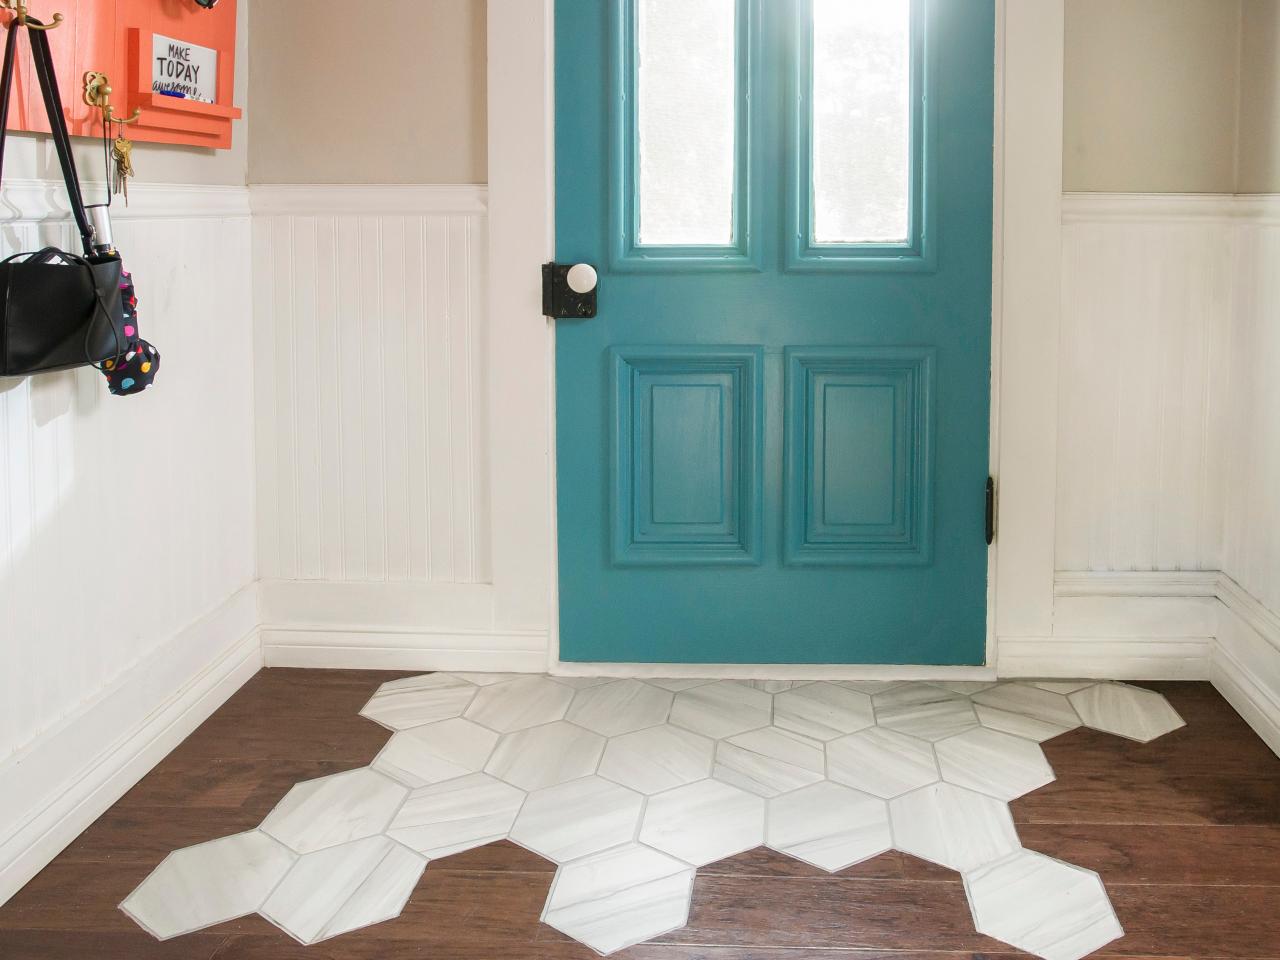 A Tile Rug Within Hardwood Floor, Can You Put Ceramic Tile On A Wood Floor